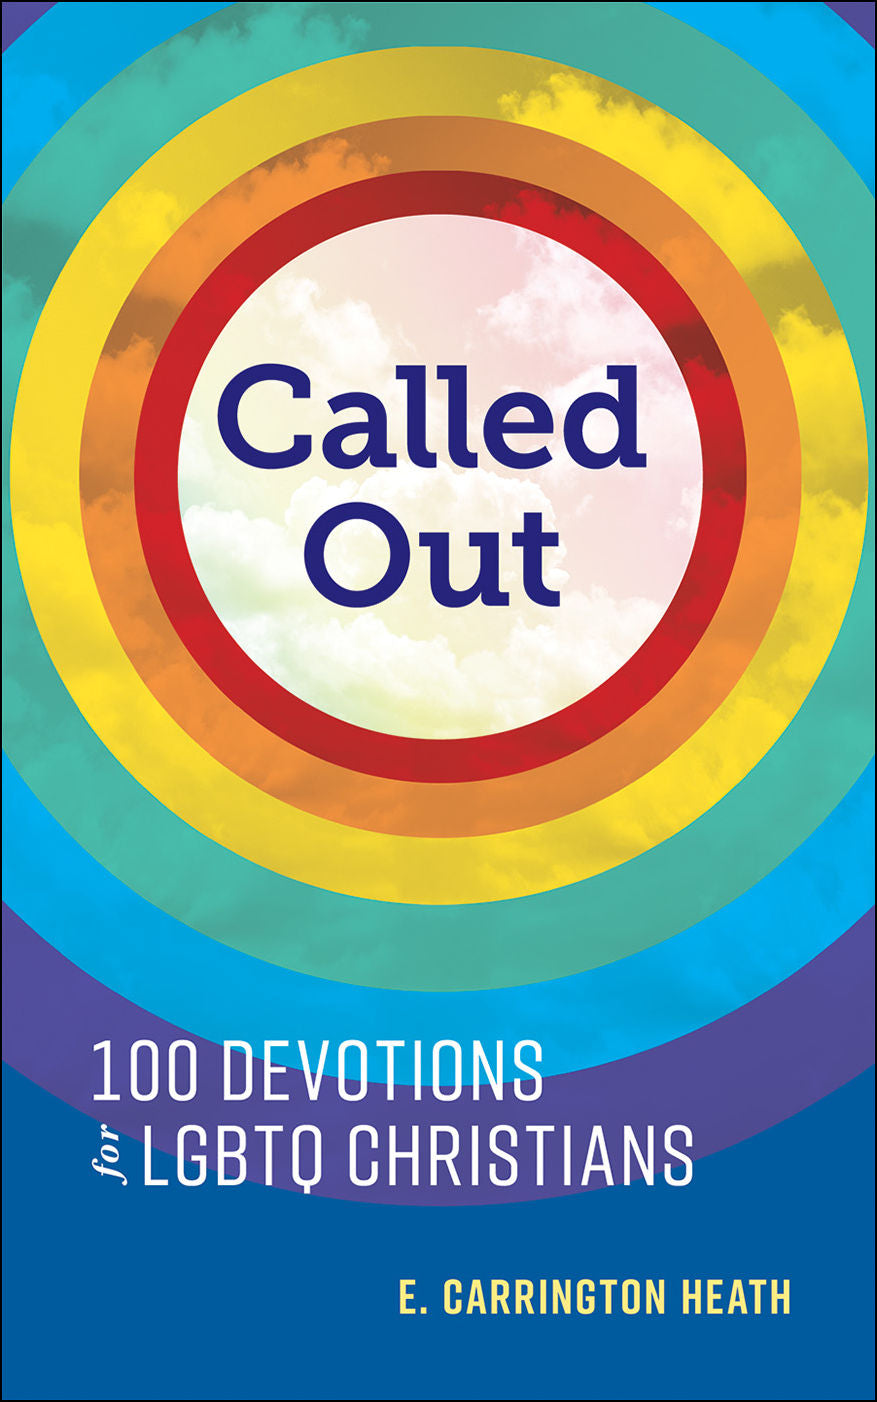 Called Out: 100 Devotions for LGBTQ Christians by E. Carrington Heath